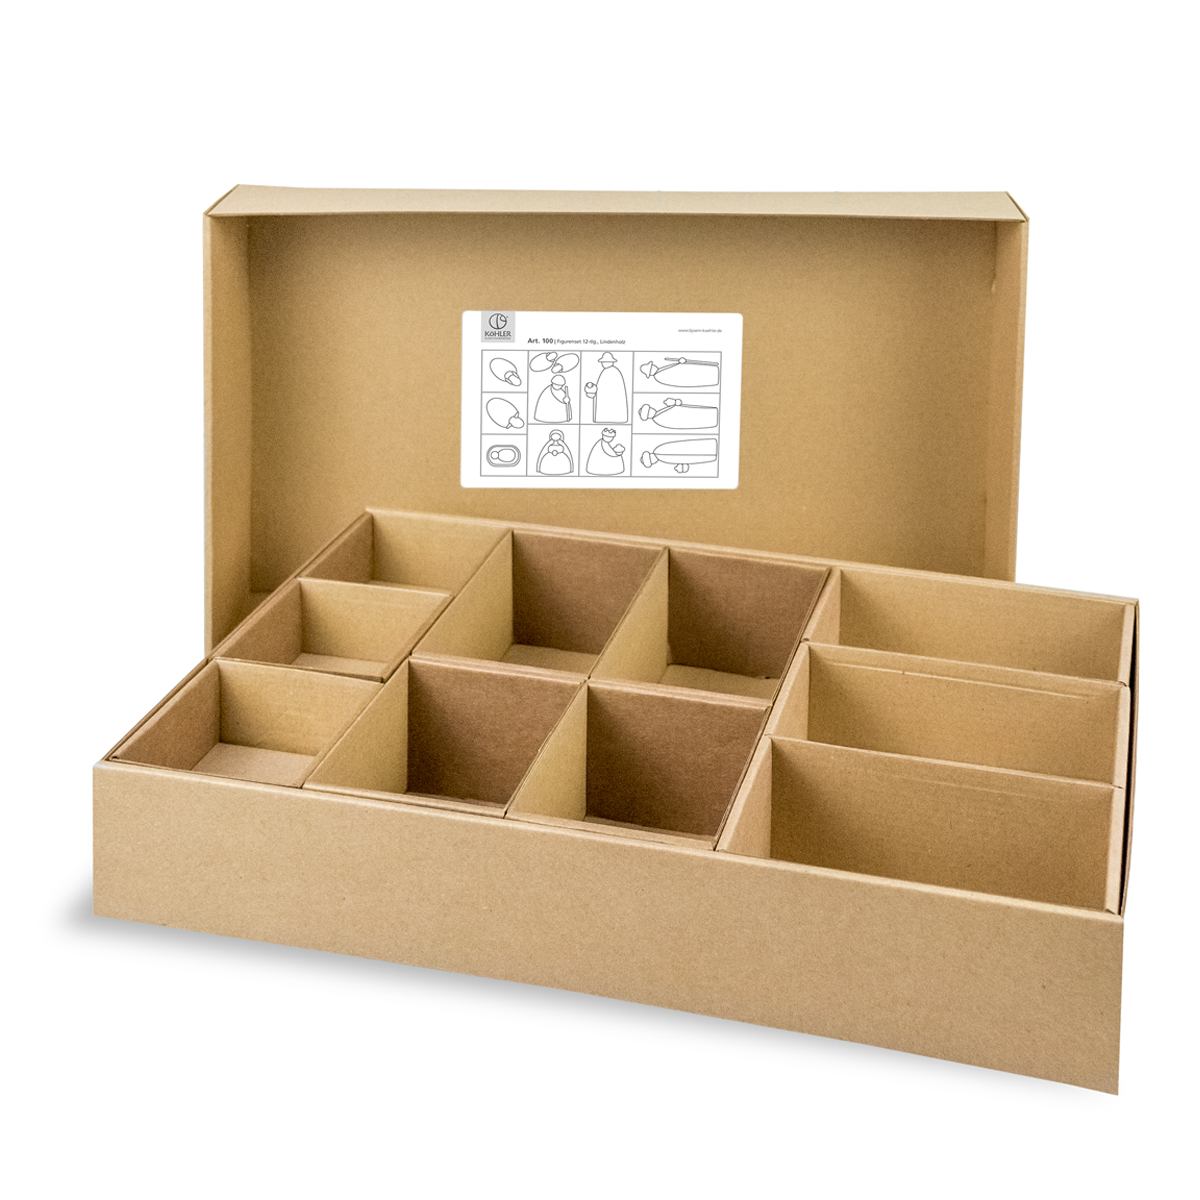 Spare box for storing the small nativity figures